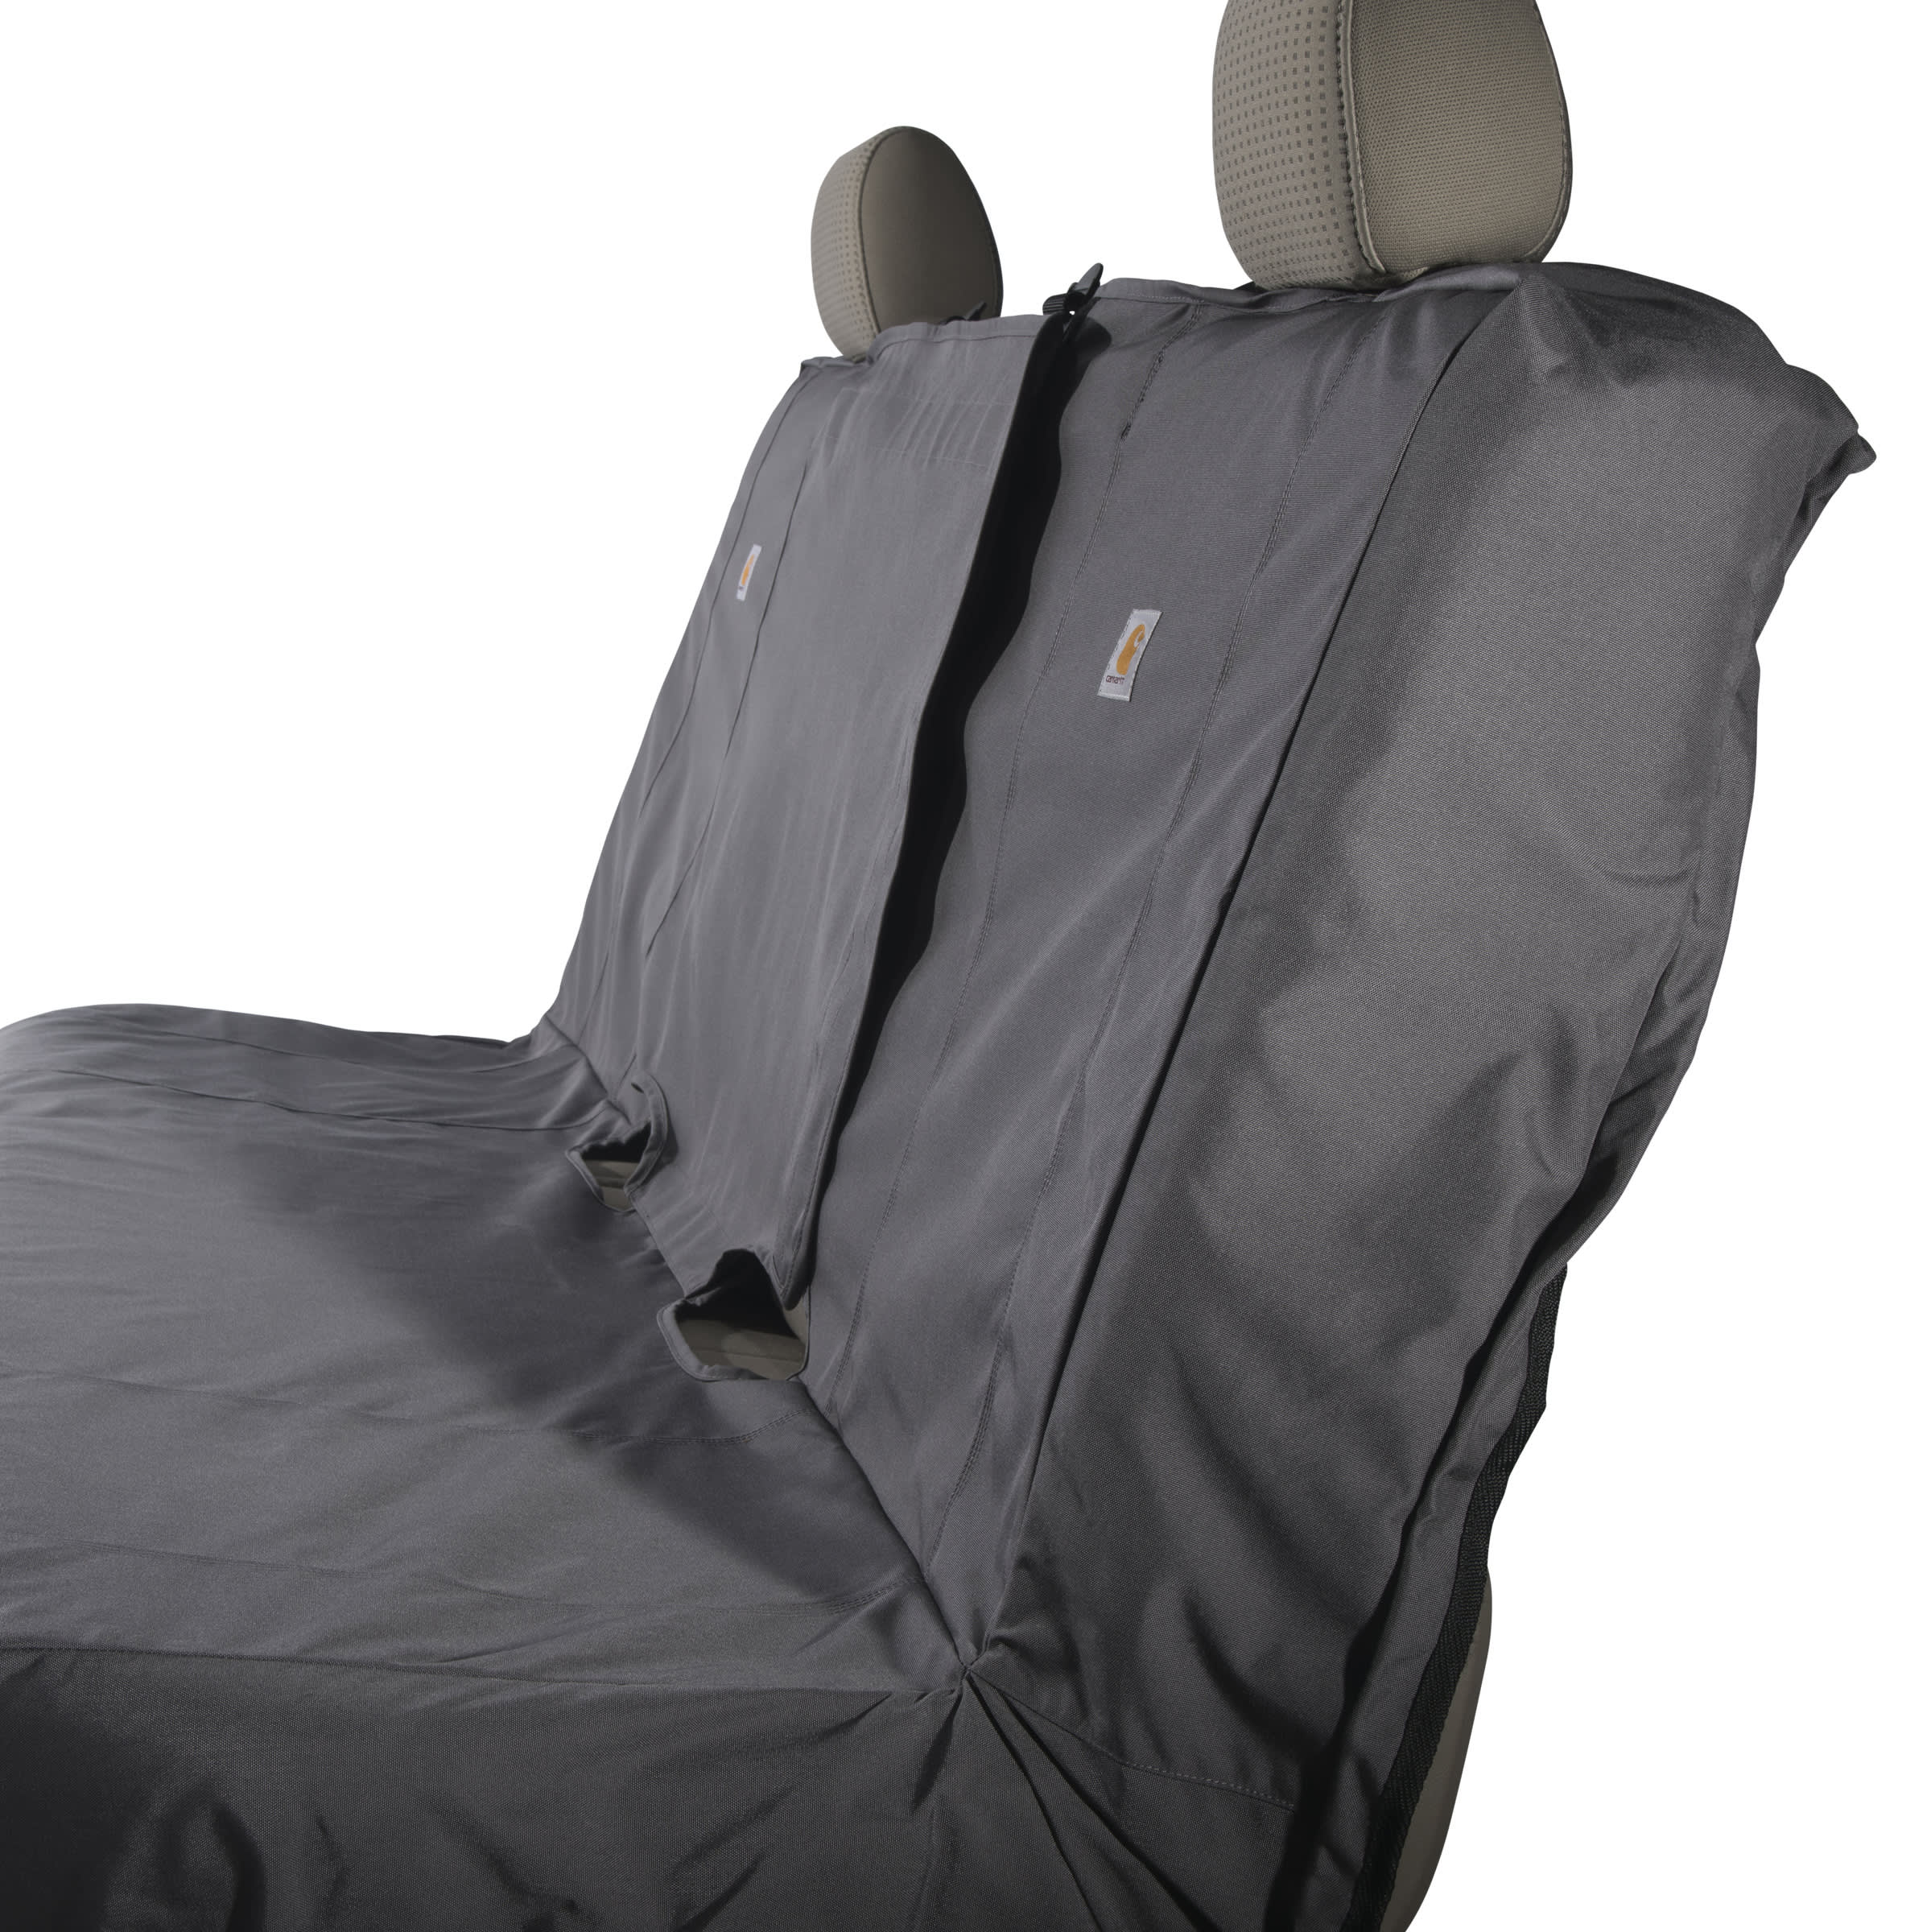 Carhartt® Universal Fit Nylon Duck Full-Size Bench Seat Cover